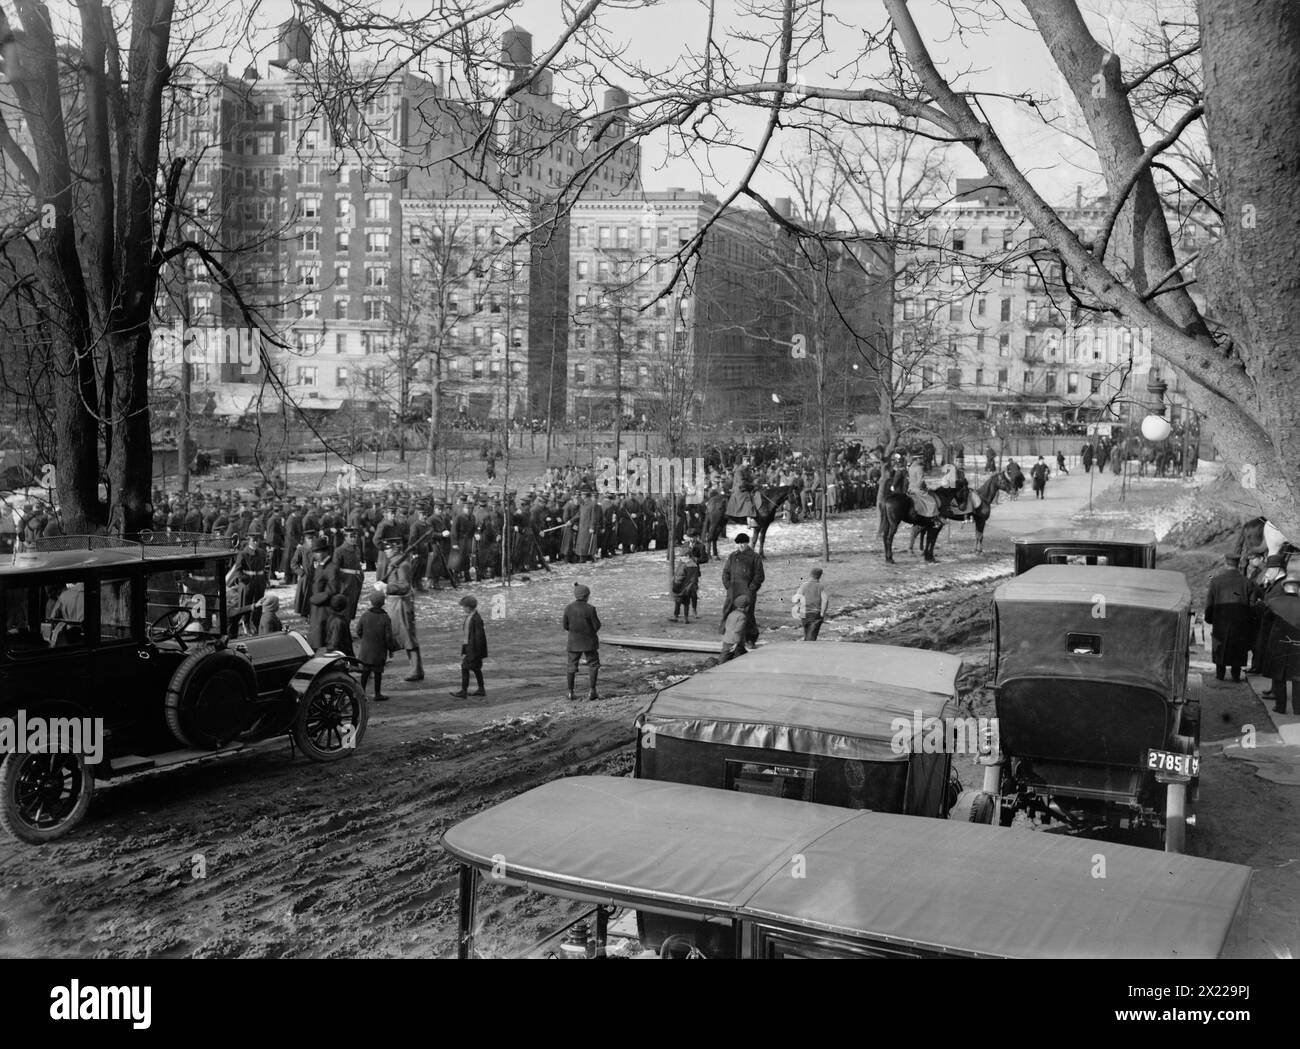 Reid Funeral, 1913. Shows cars and crowd gathered outside the Cathedral of St. John the Divine in New York City for the funeral of Whitelaw Reid, American Ambassador to Great Britain. Stock Photo